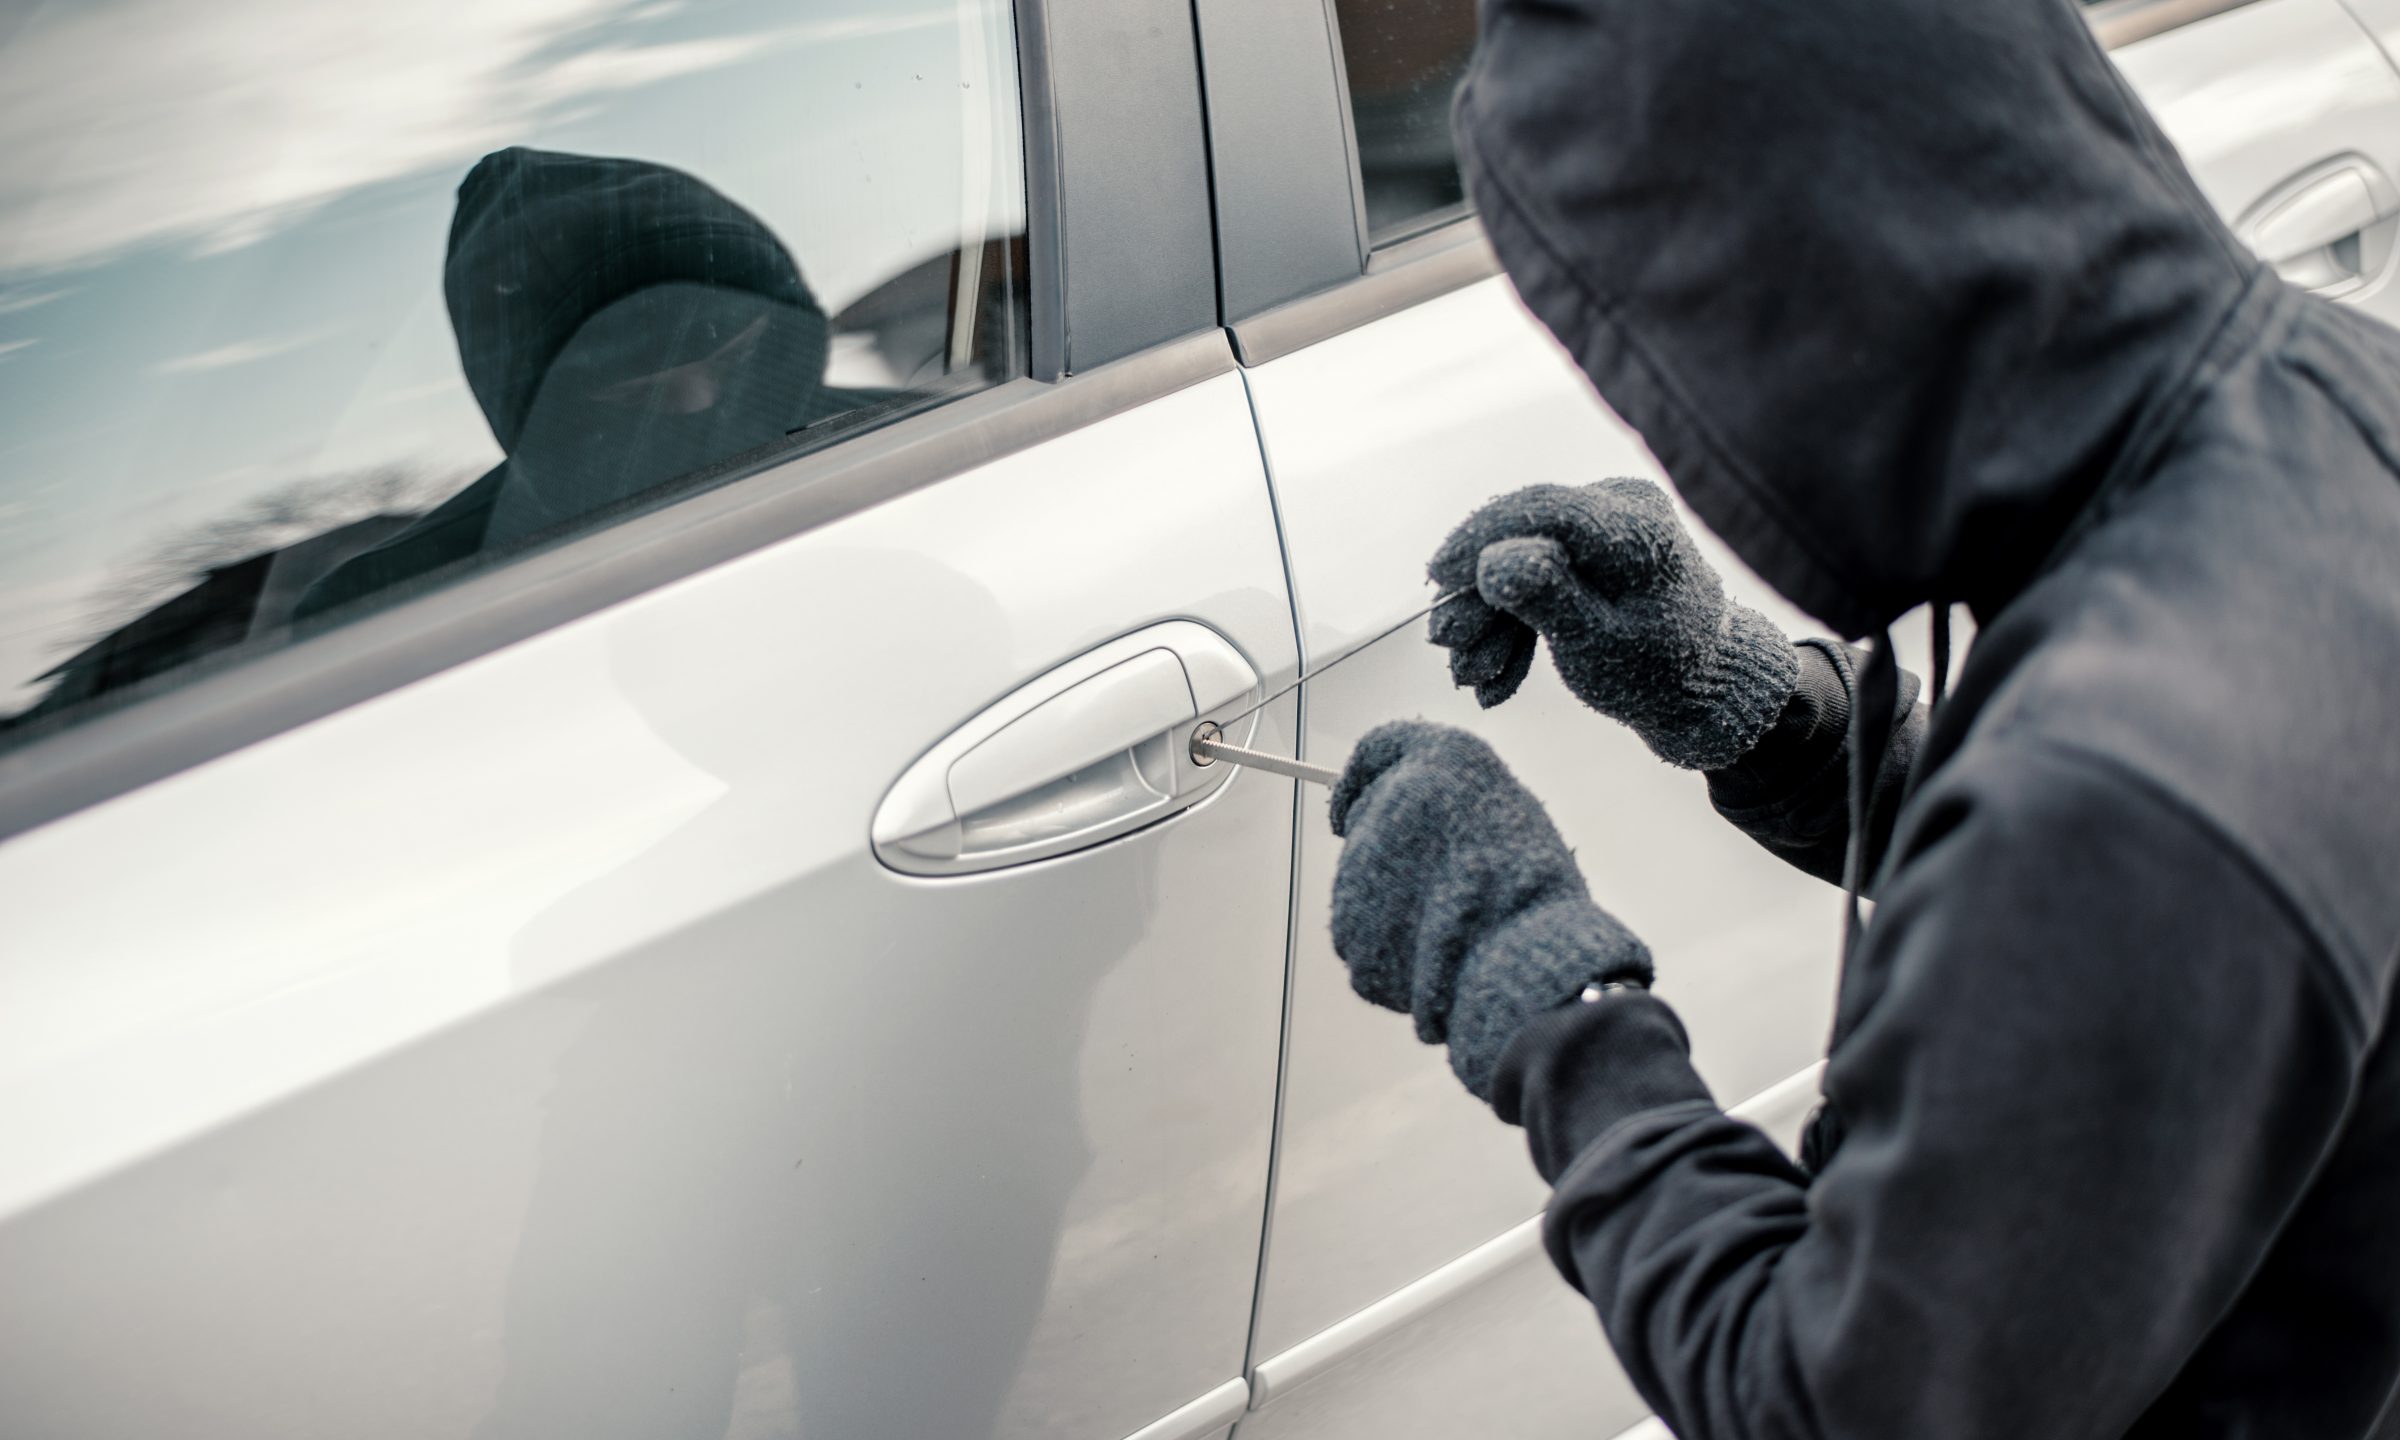 Car thieves nabbed by cops before the victims became aware